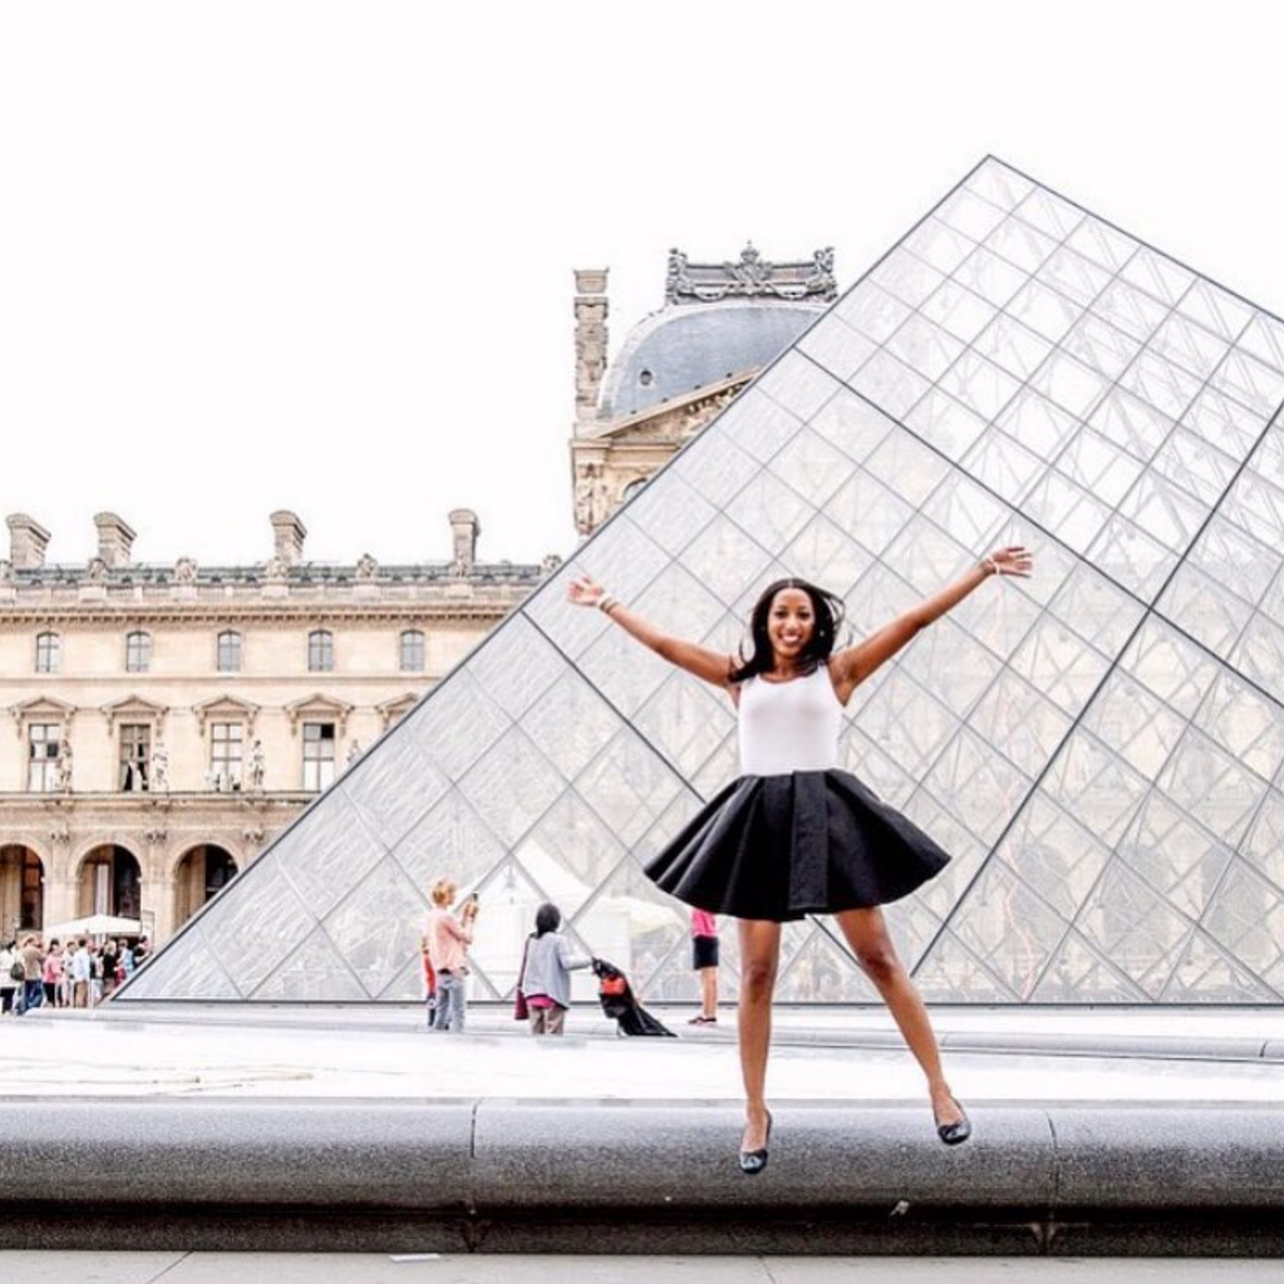 The 15 Best Black Travel Moments You Missed This Week: Fun Loving By The Louvre in Paris
